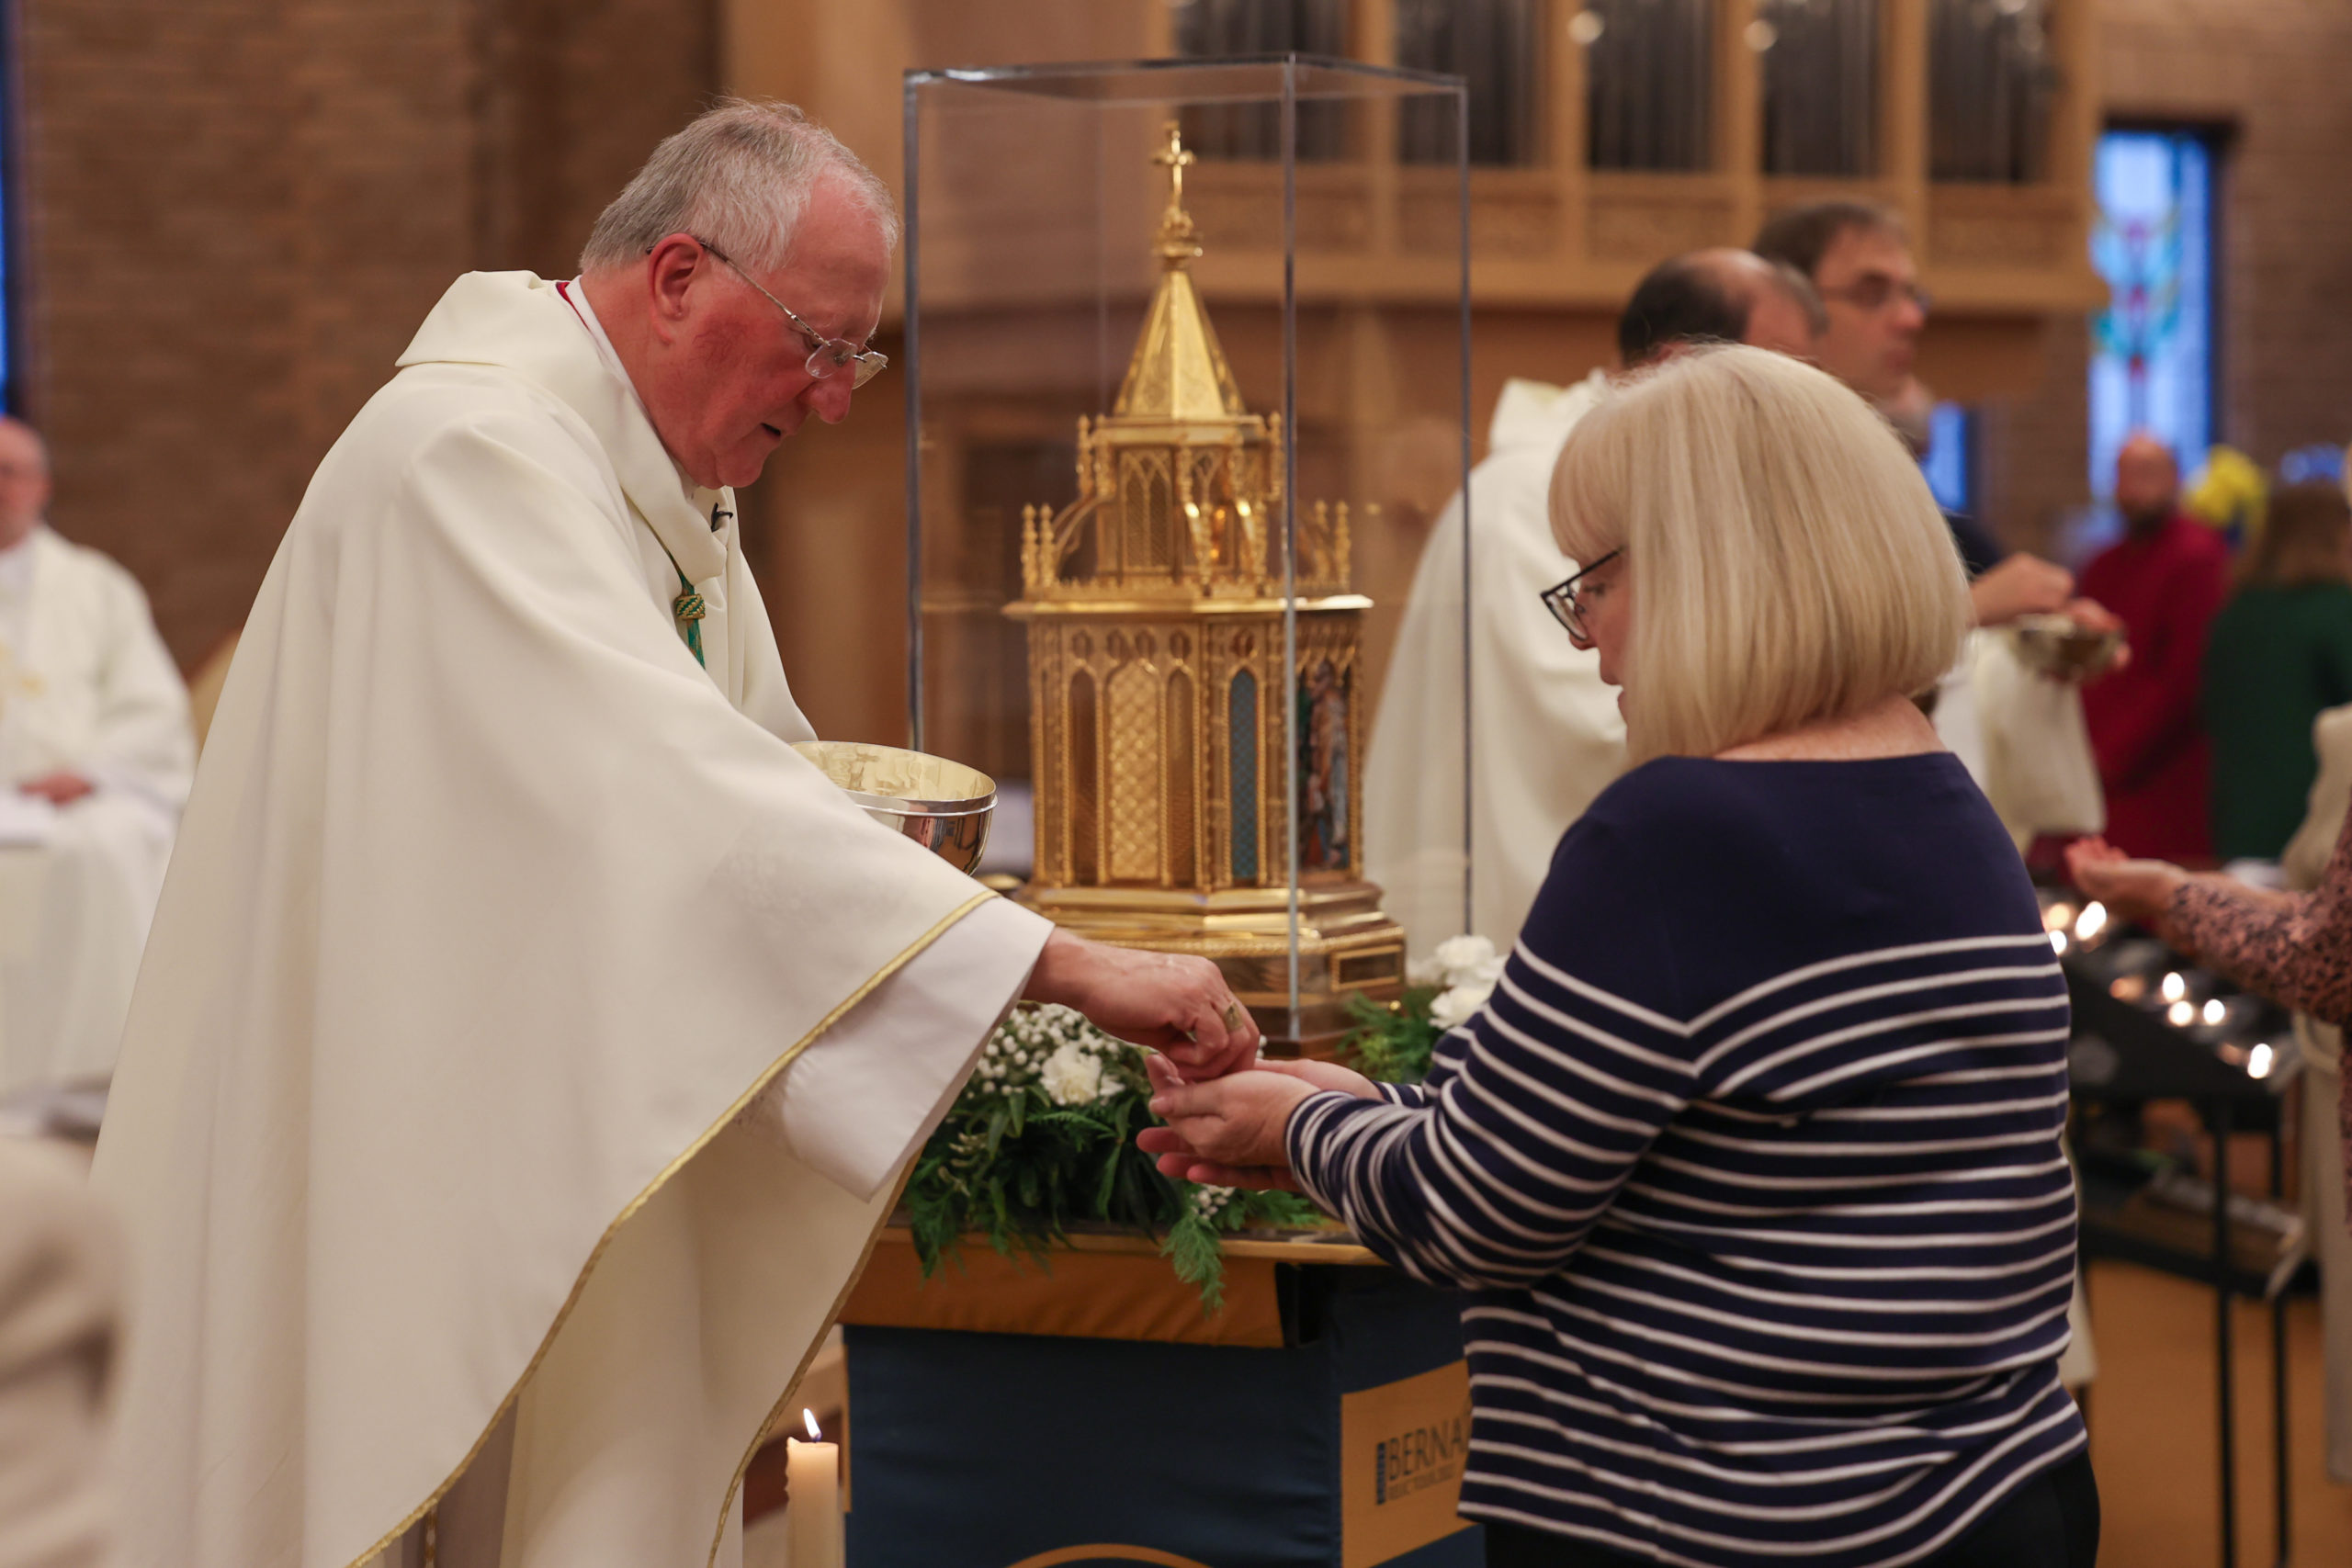 Bishop Terry distributes Holy Communion during the visit of the relics of St Bernadette – Photo by Chris Booth